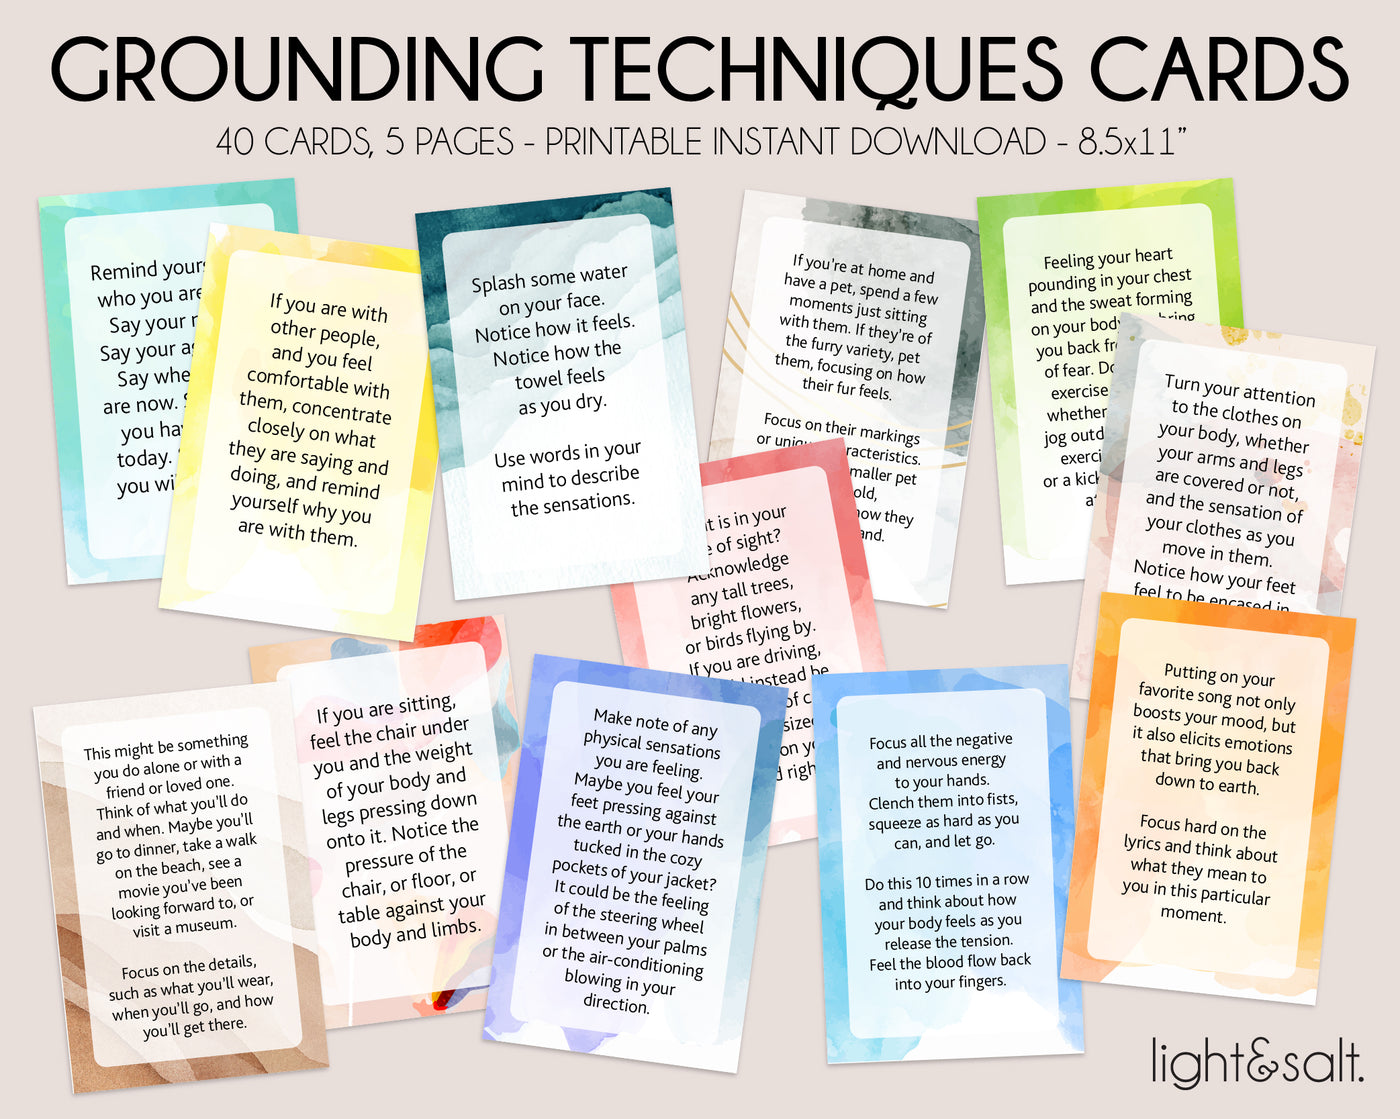 Anxiety Coping Cards bundle, 172 flash cards